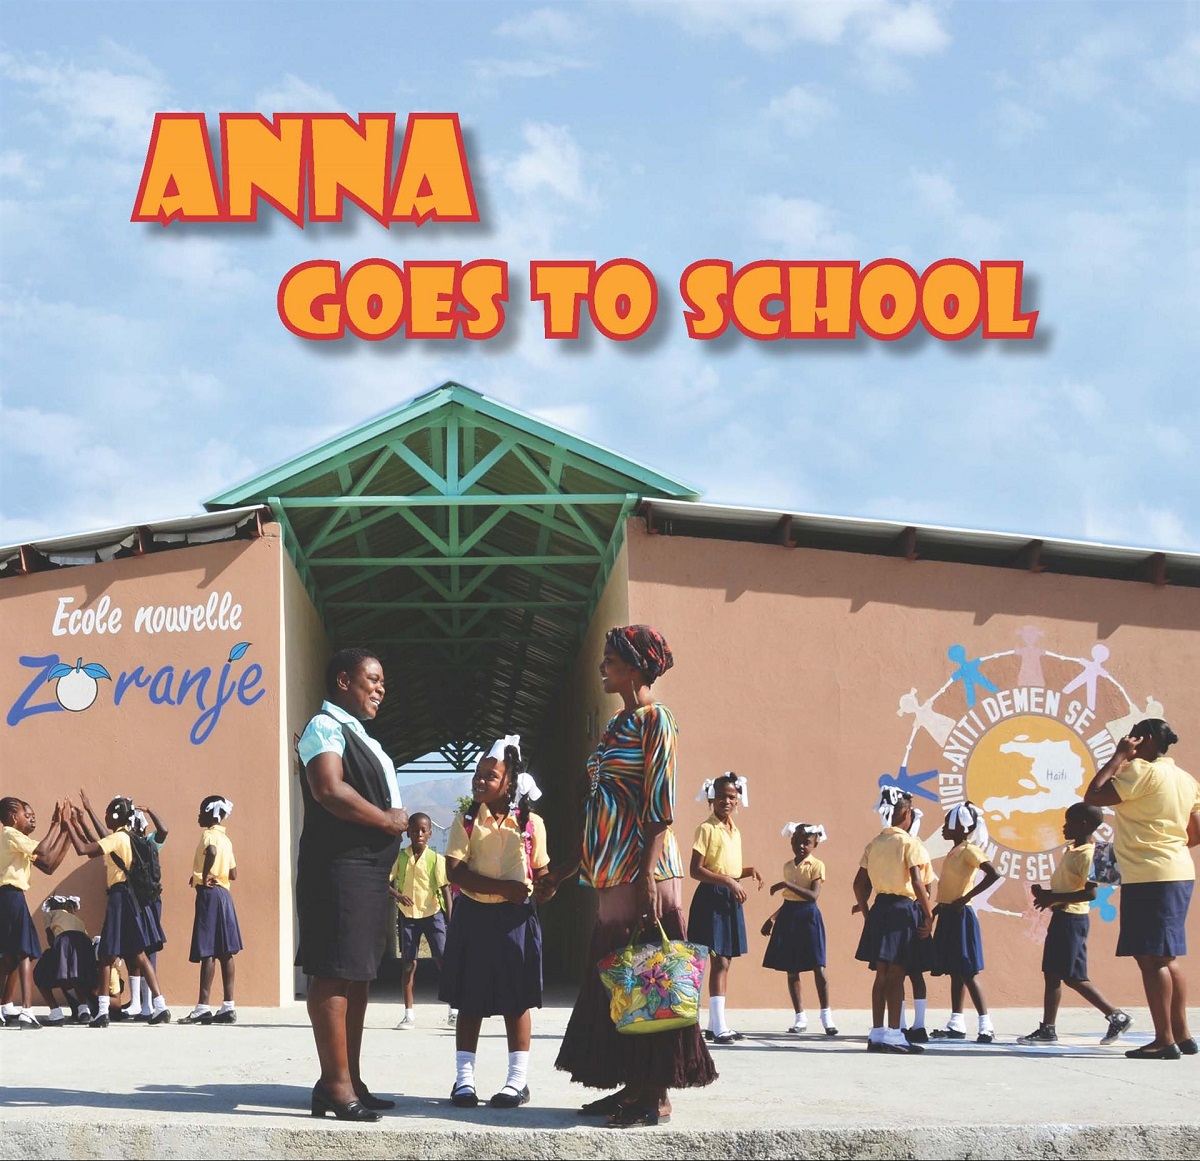 Anna goes to school